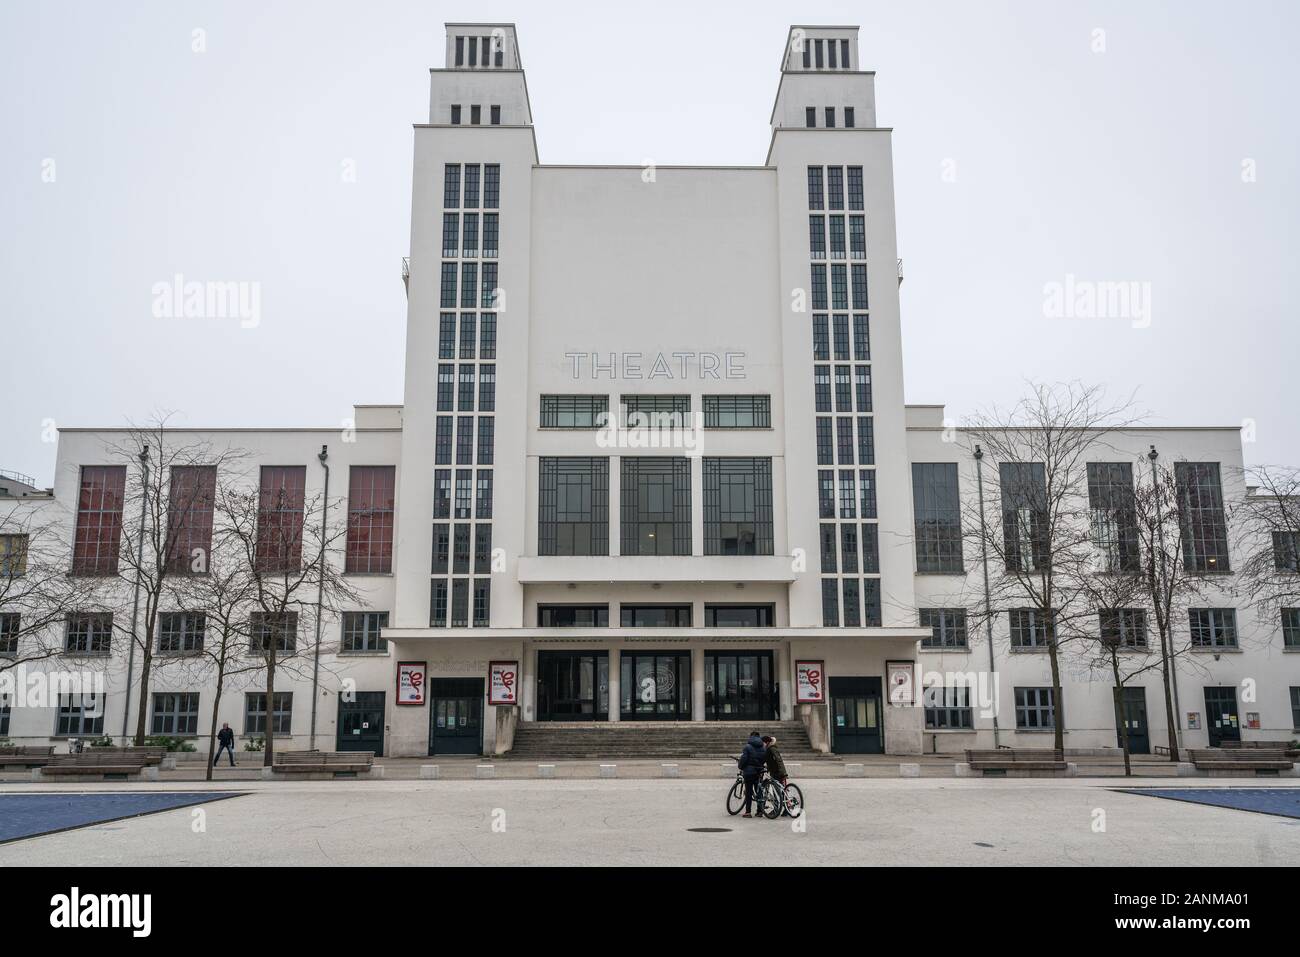 Villeurbanne France , 2 January 2020 : Theatre National Populaire TNP or People's National Theater building front view in Villeurbanne France Stock Photo